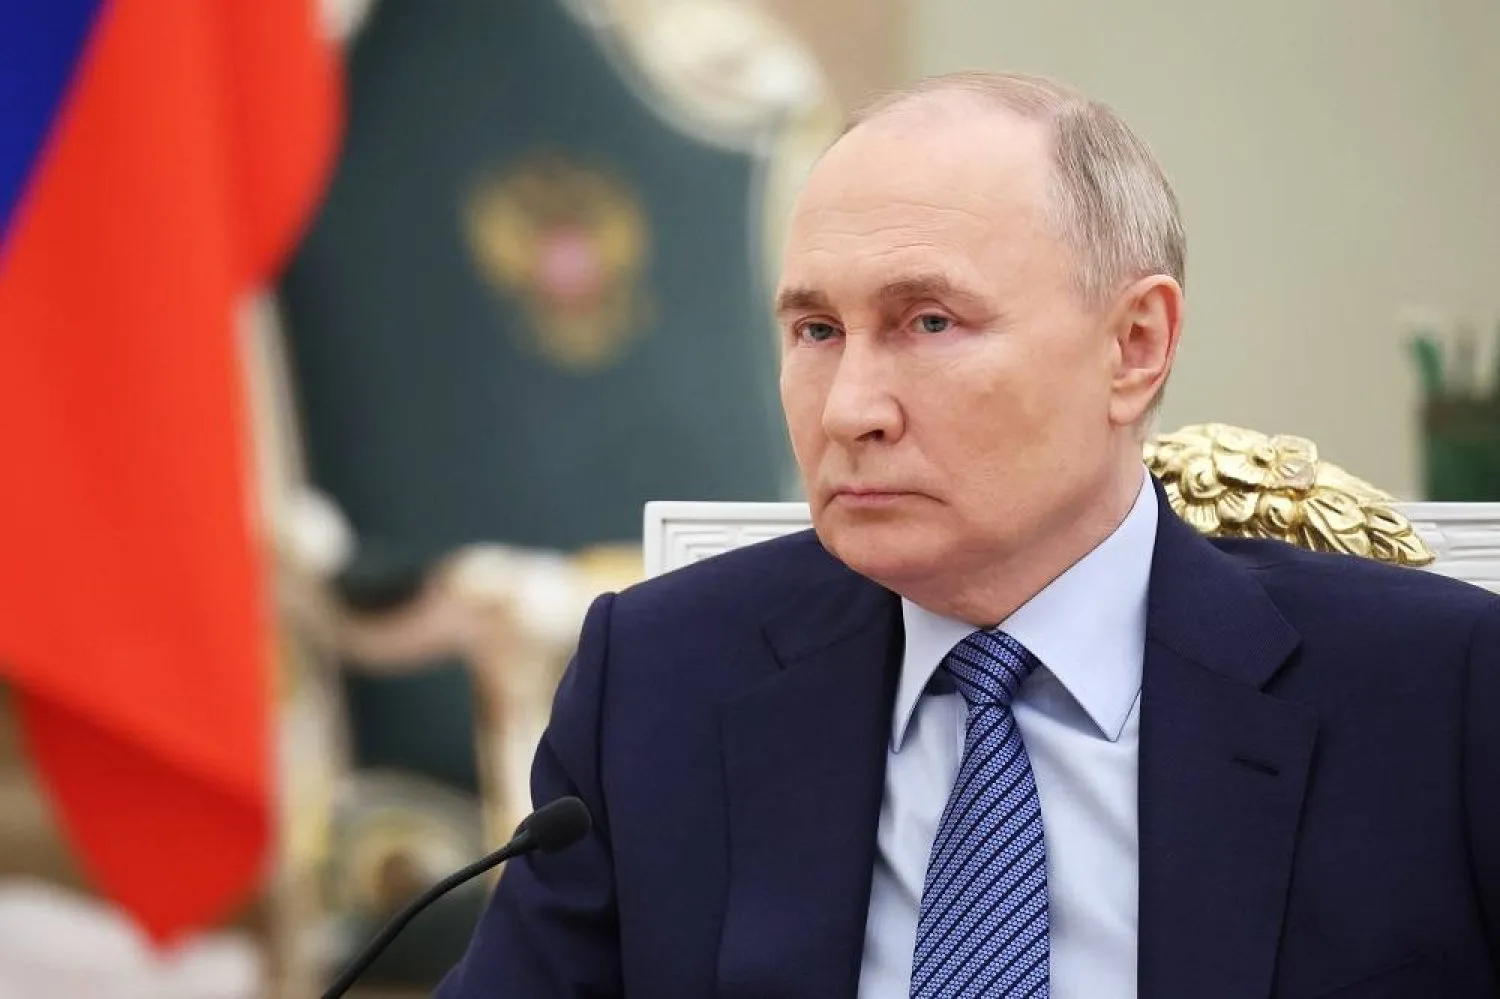 Putin issues a nuclear war warning to the West